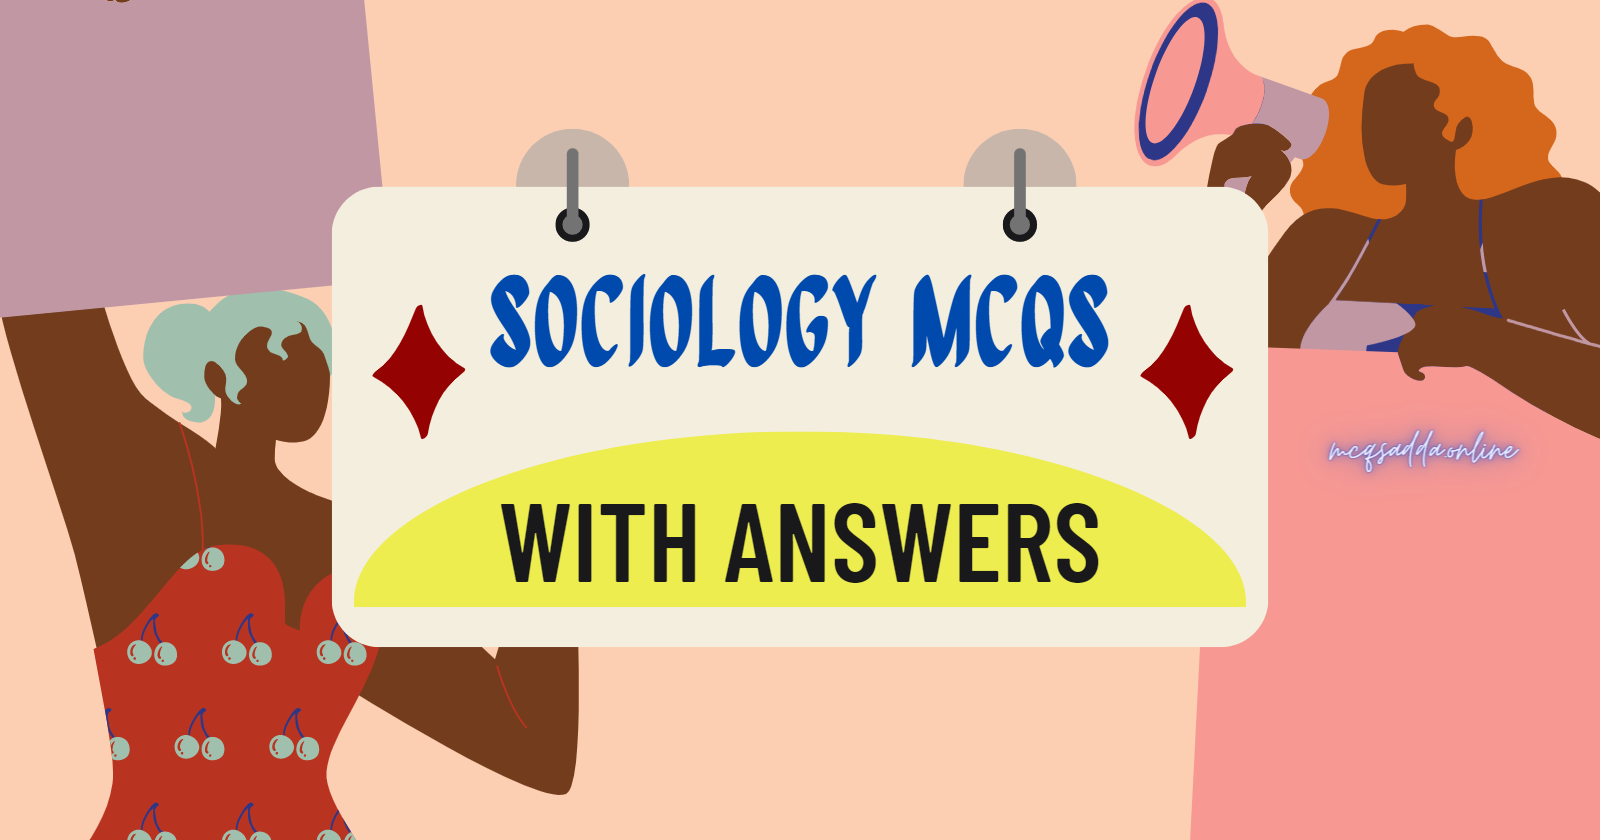 Sociology MCQs with answers